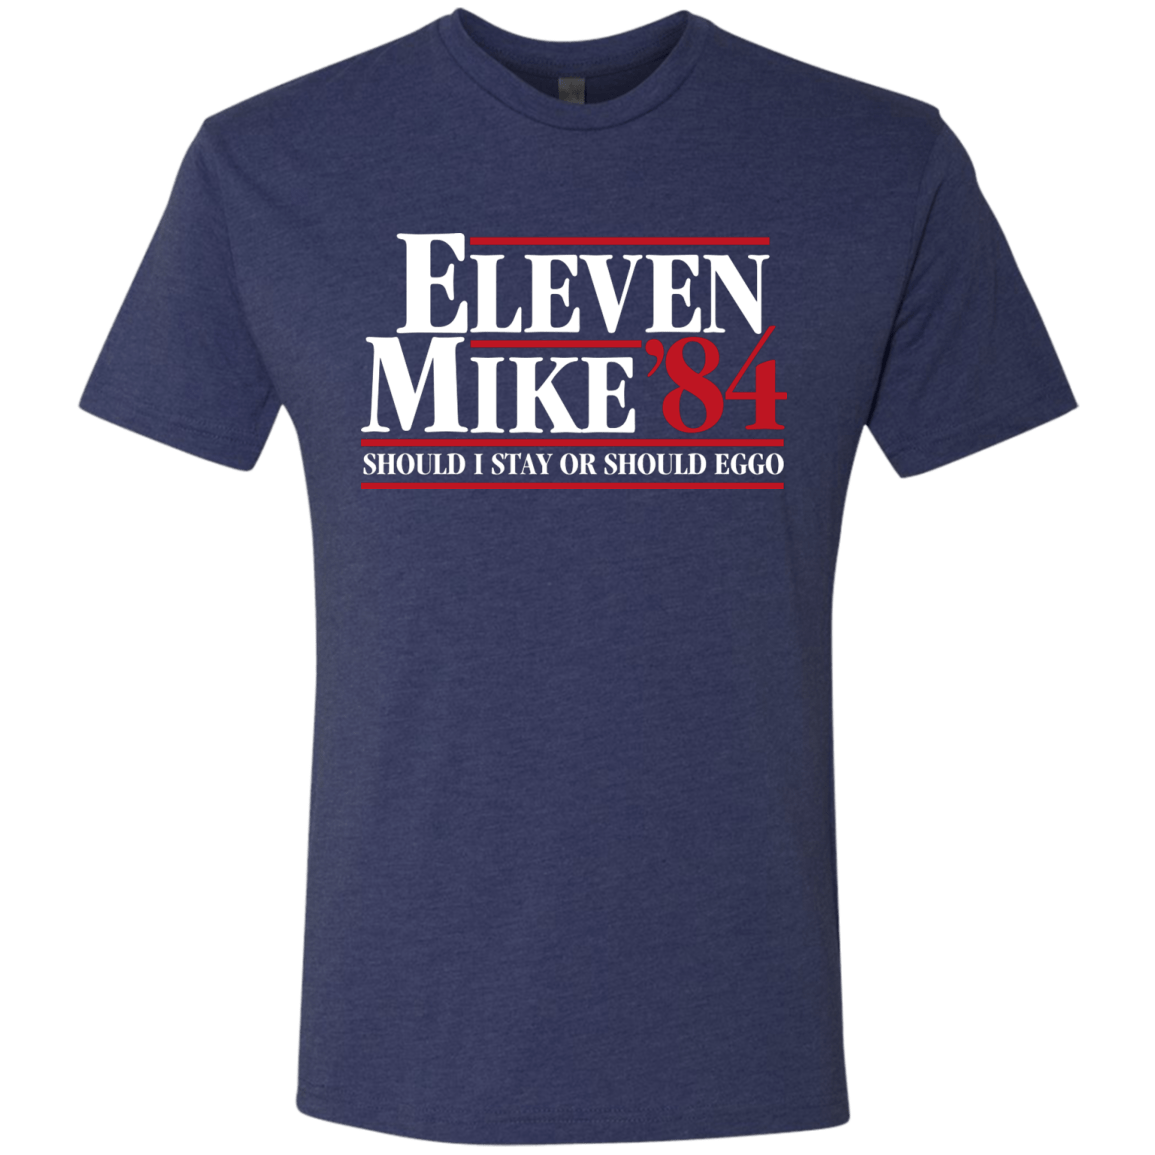 T-Shirts Vintage Navy / Small Eleven Mike 84 - Should I Stay or Should Eggo Men's Triblend T-Shirt